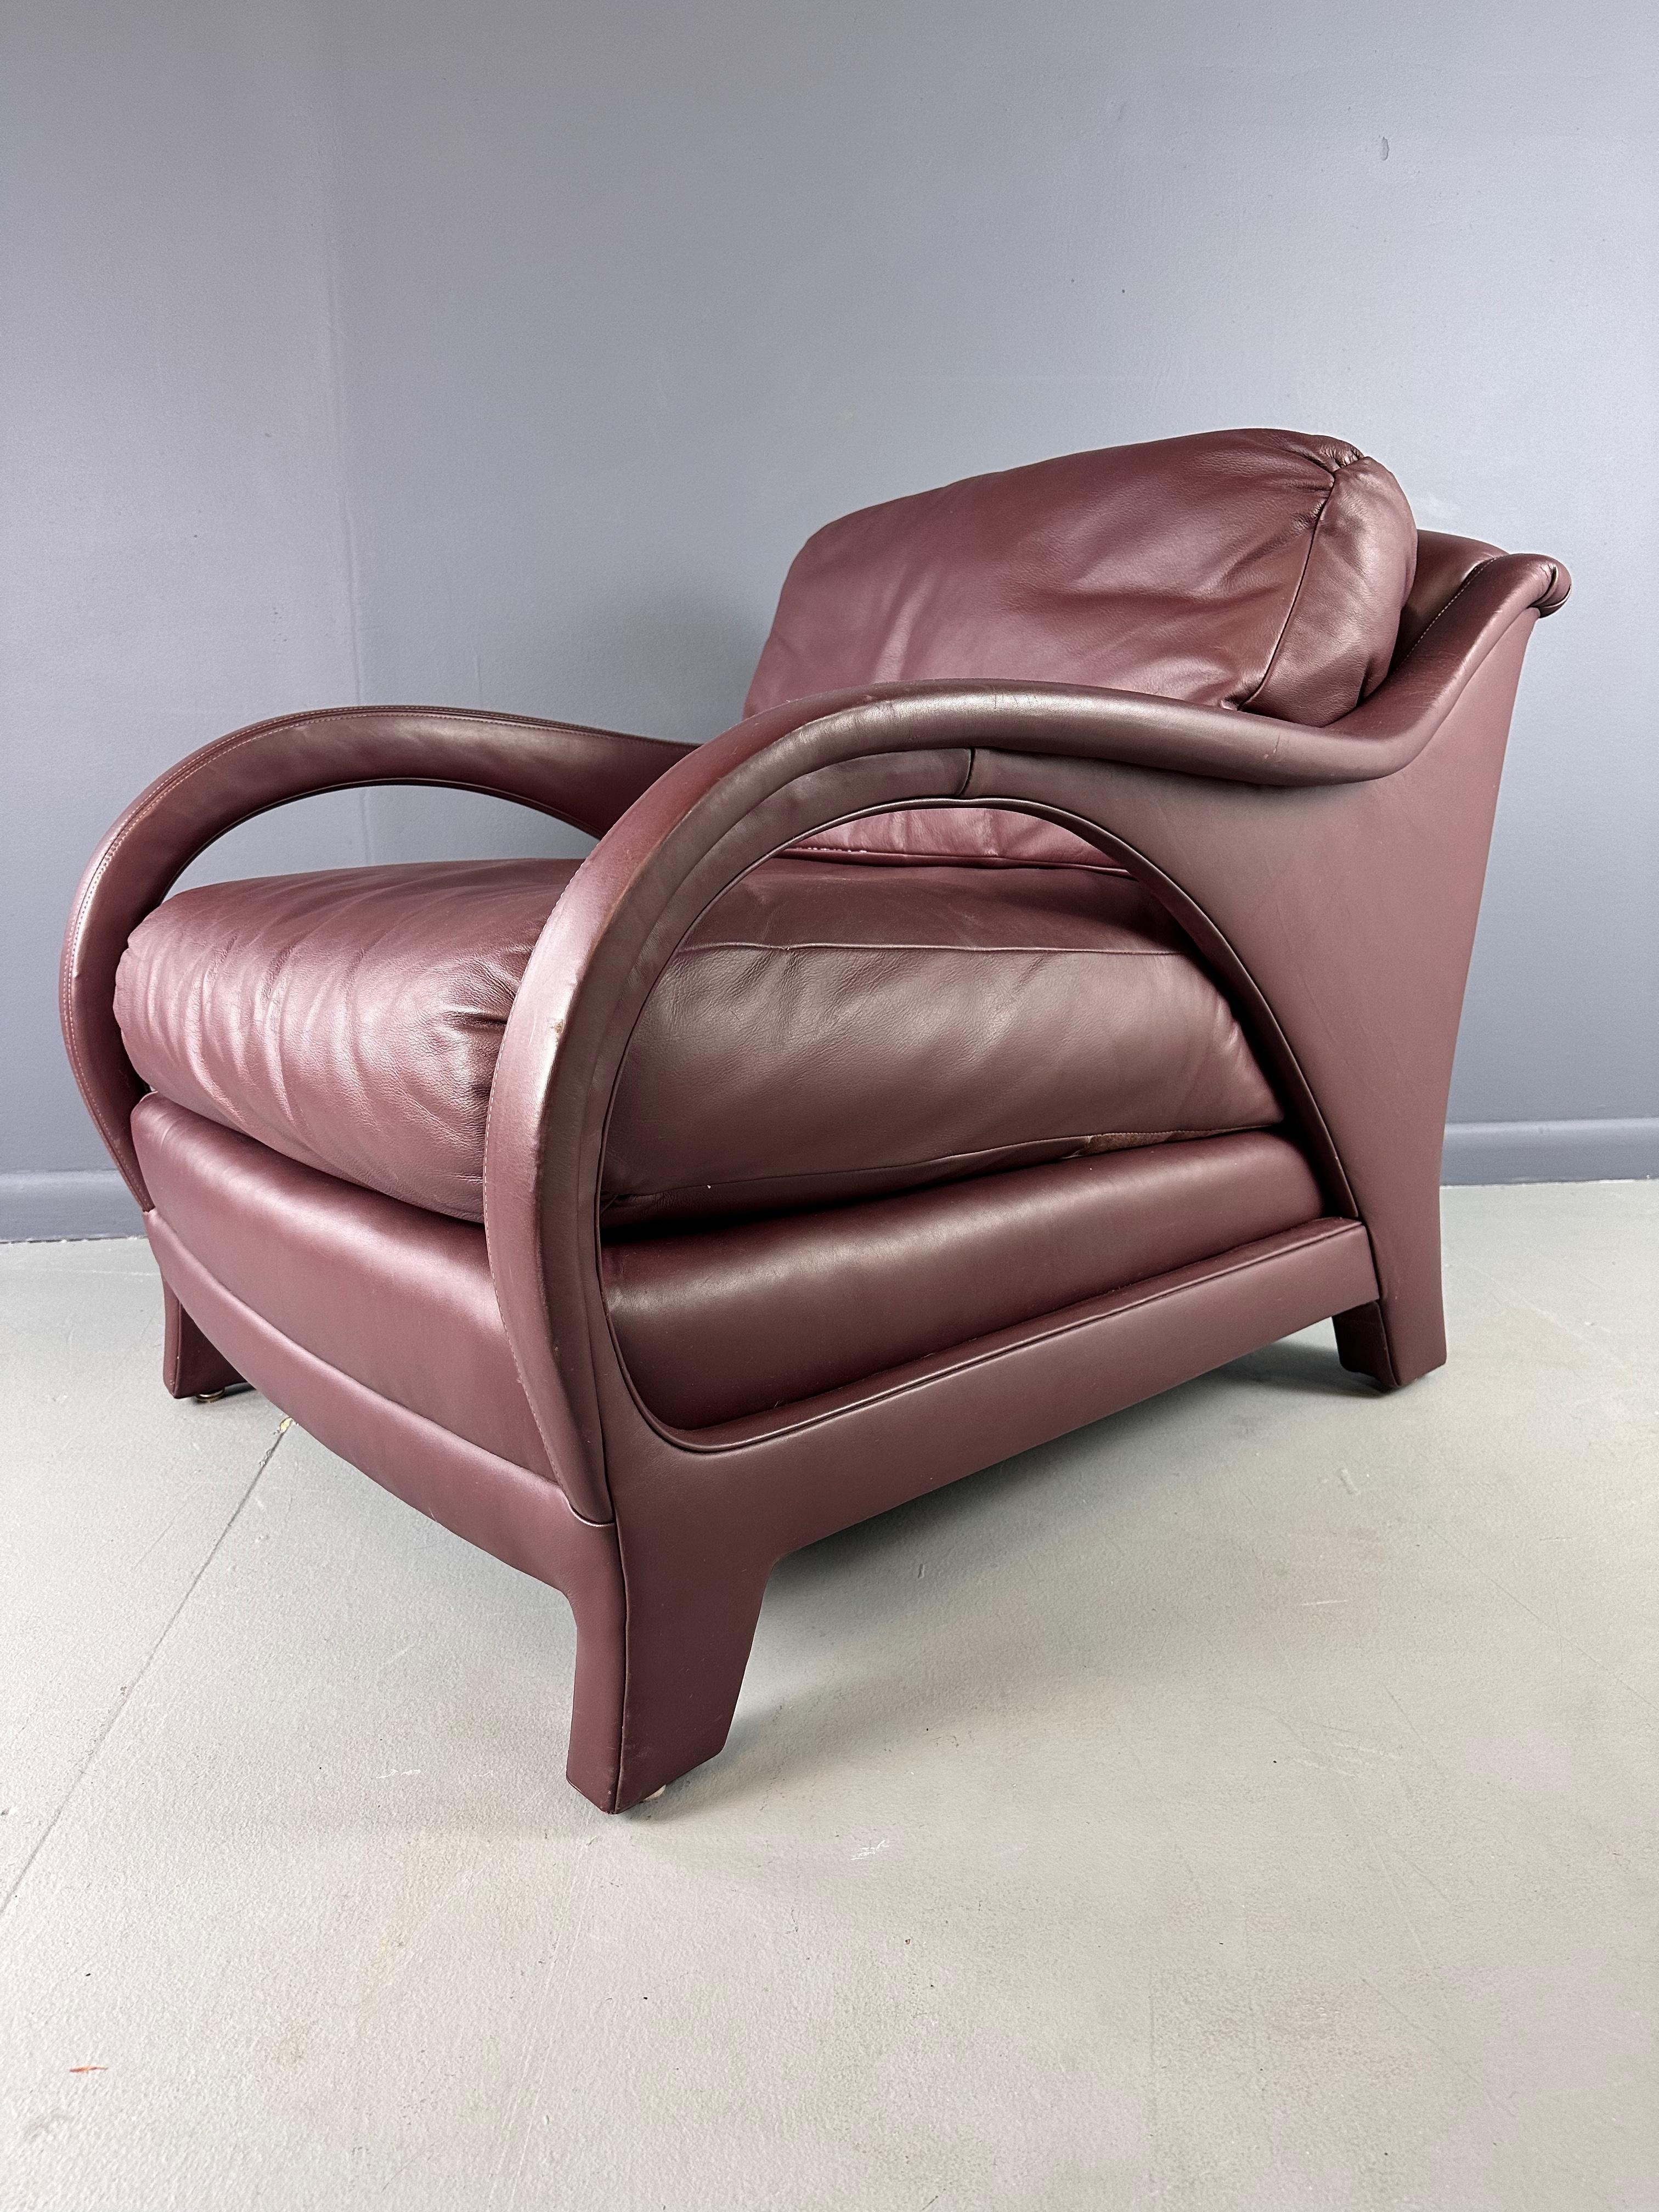 Jay Spectre Tycoon Leather Lounge Chair in Burgundy For Century In Good Condition For Sale In Philadelphia, PA